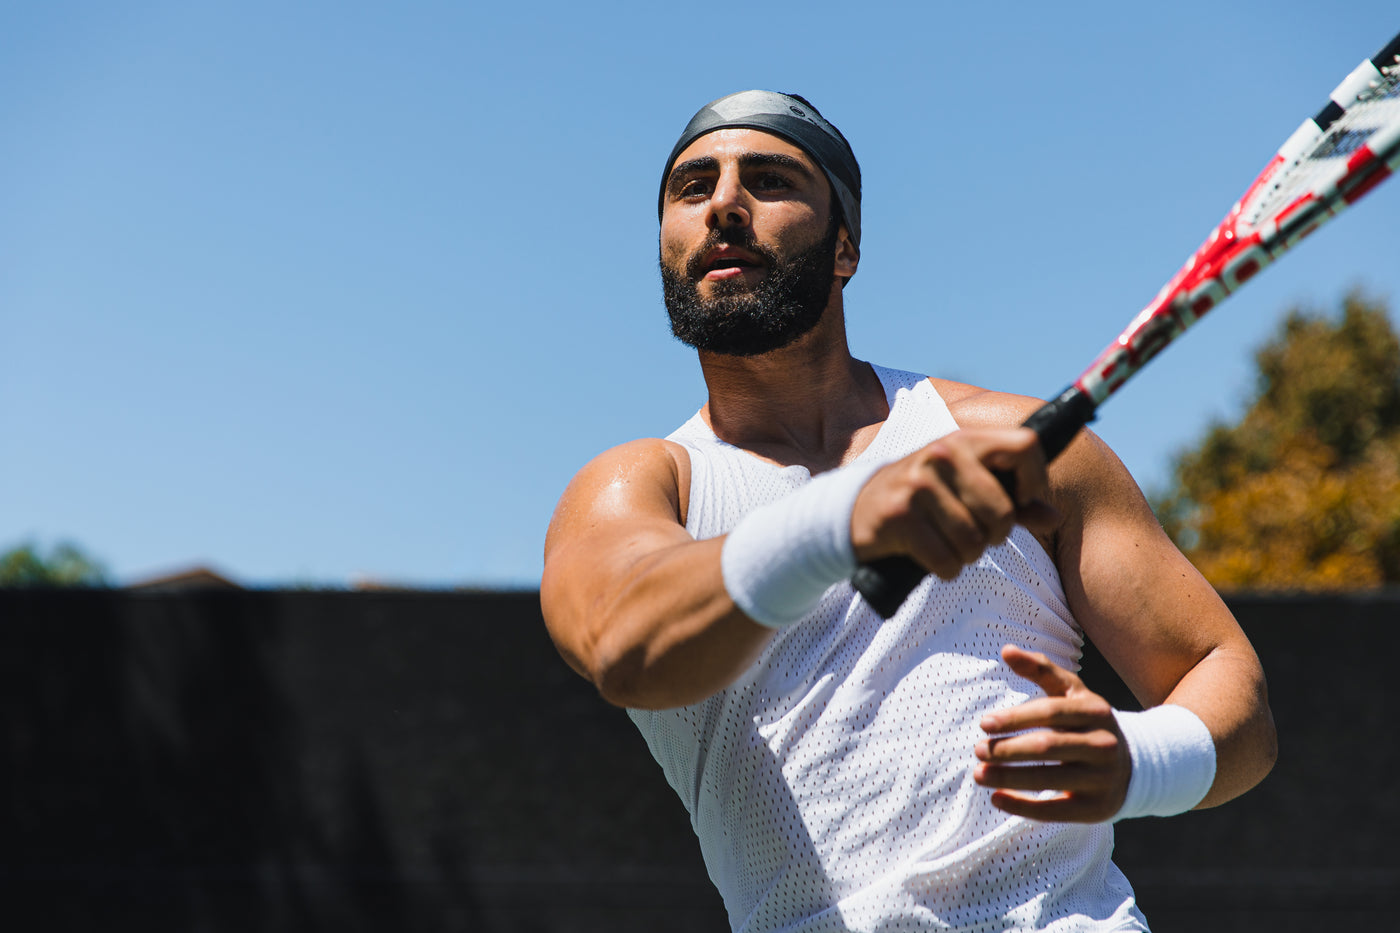 Tennis player with Suddora headbands and wristbands